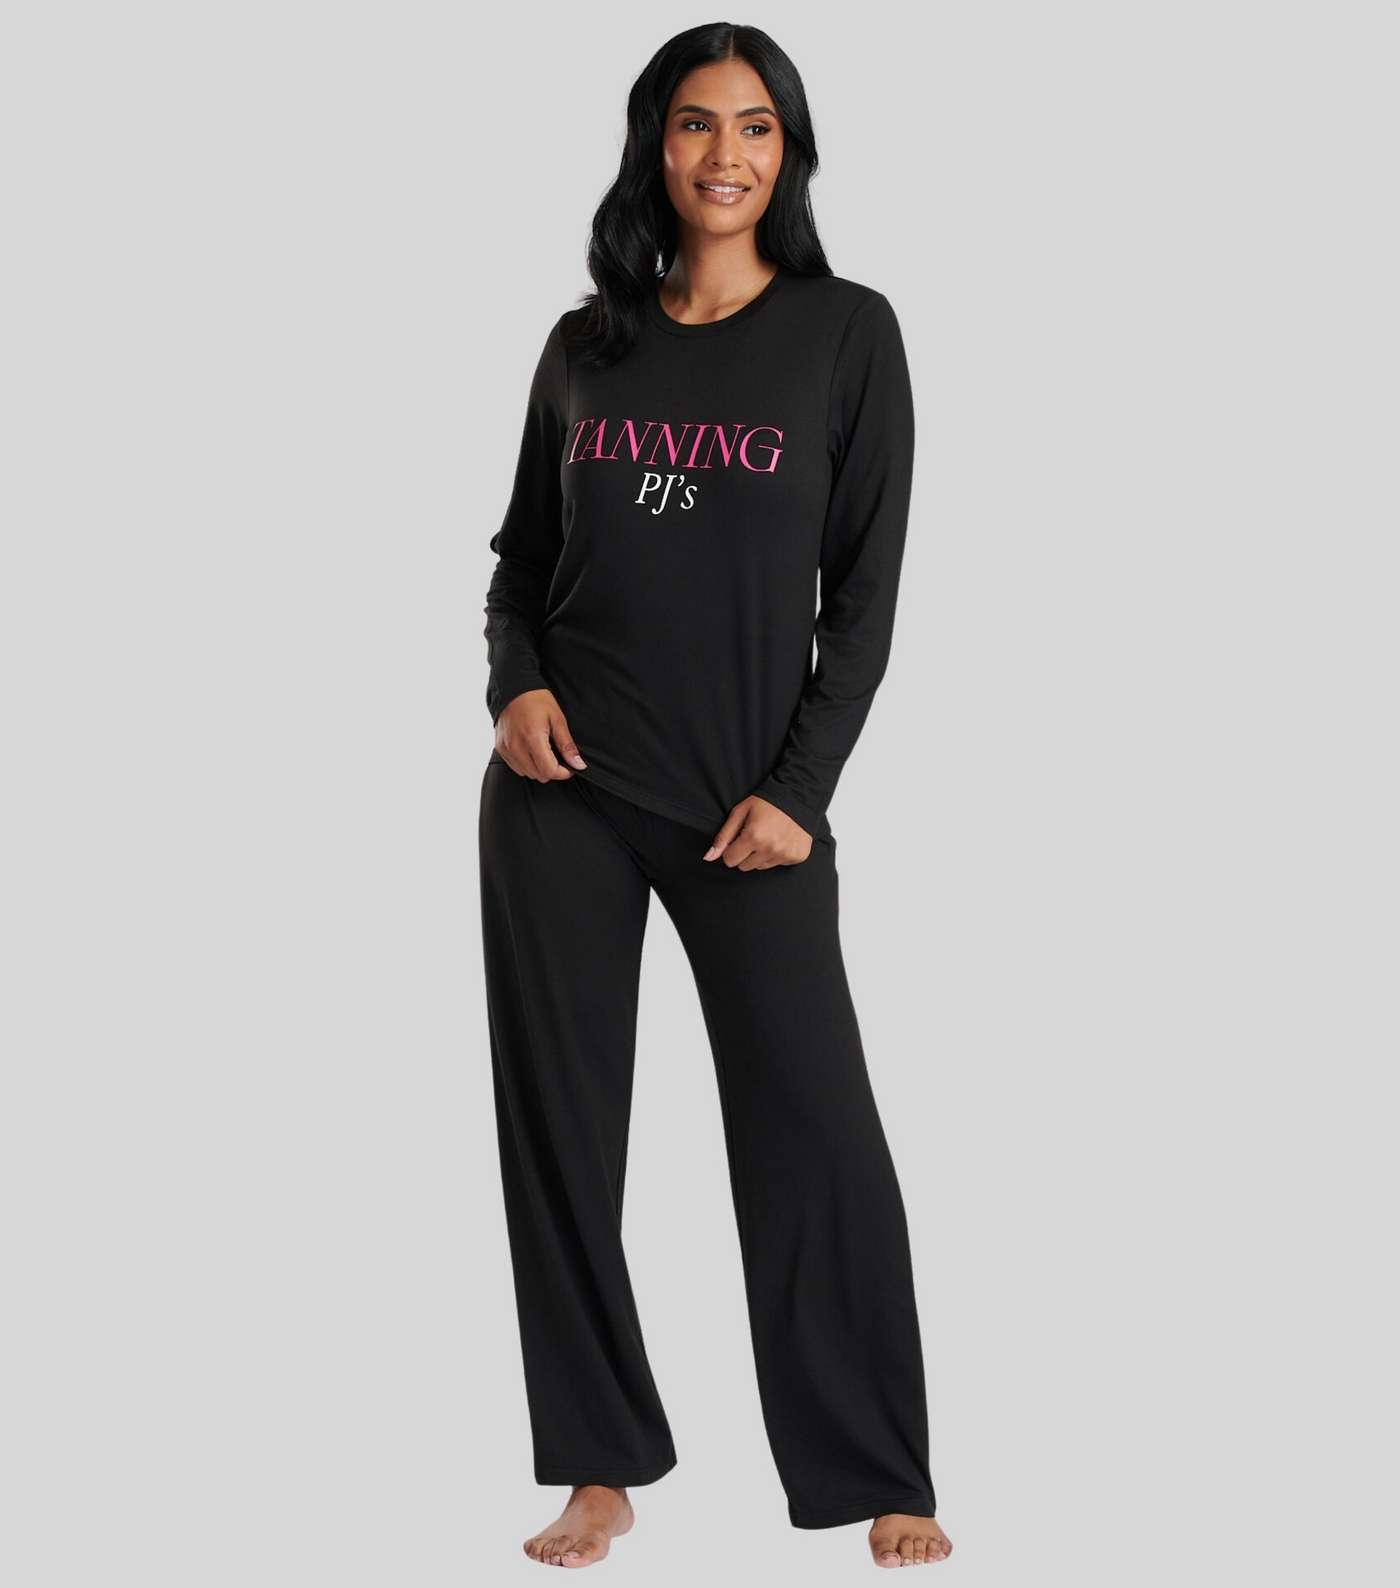 Loungeable Black Trouser Pyjama Set with Tanning PJs Logo Image 2